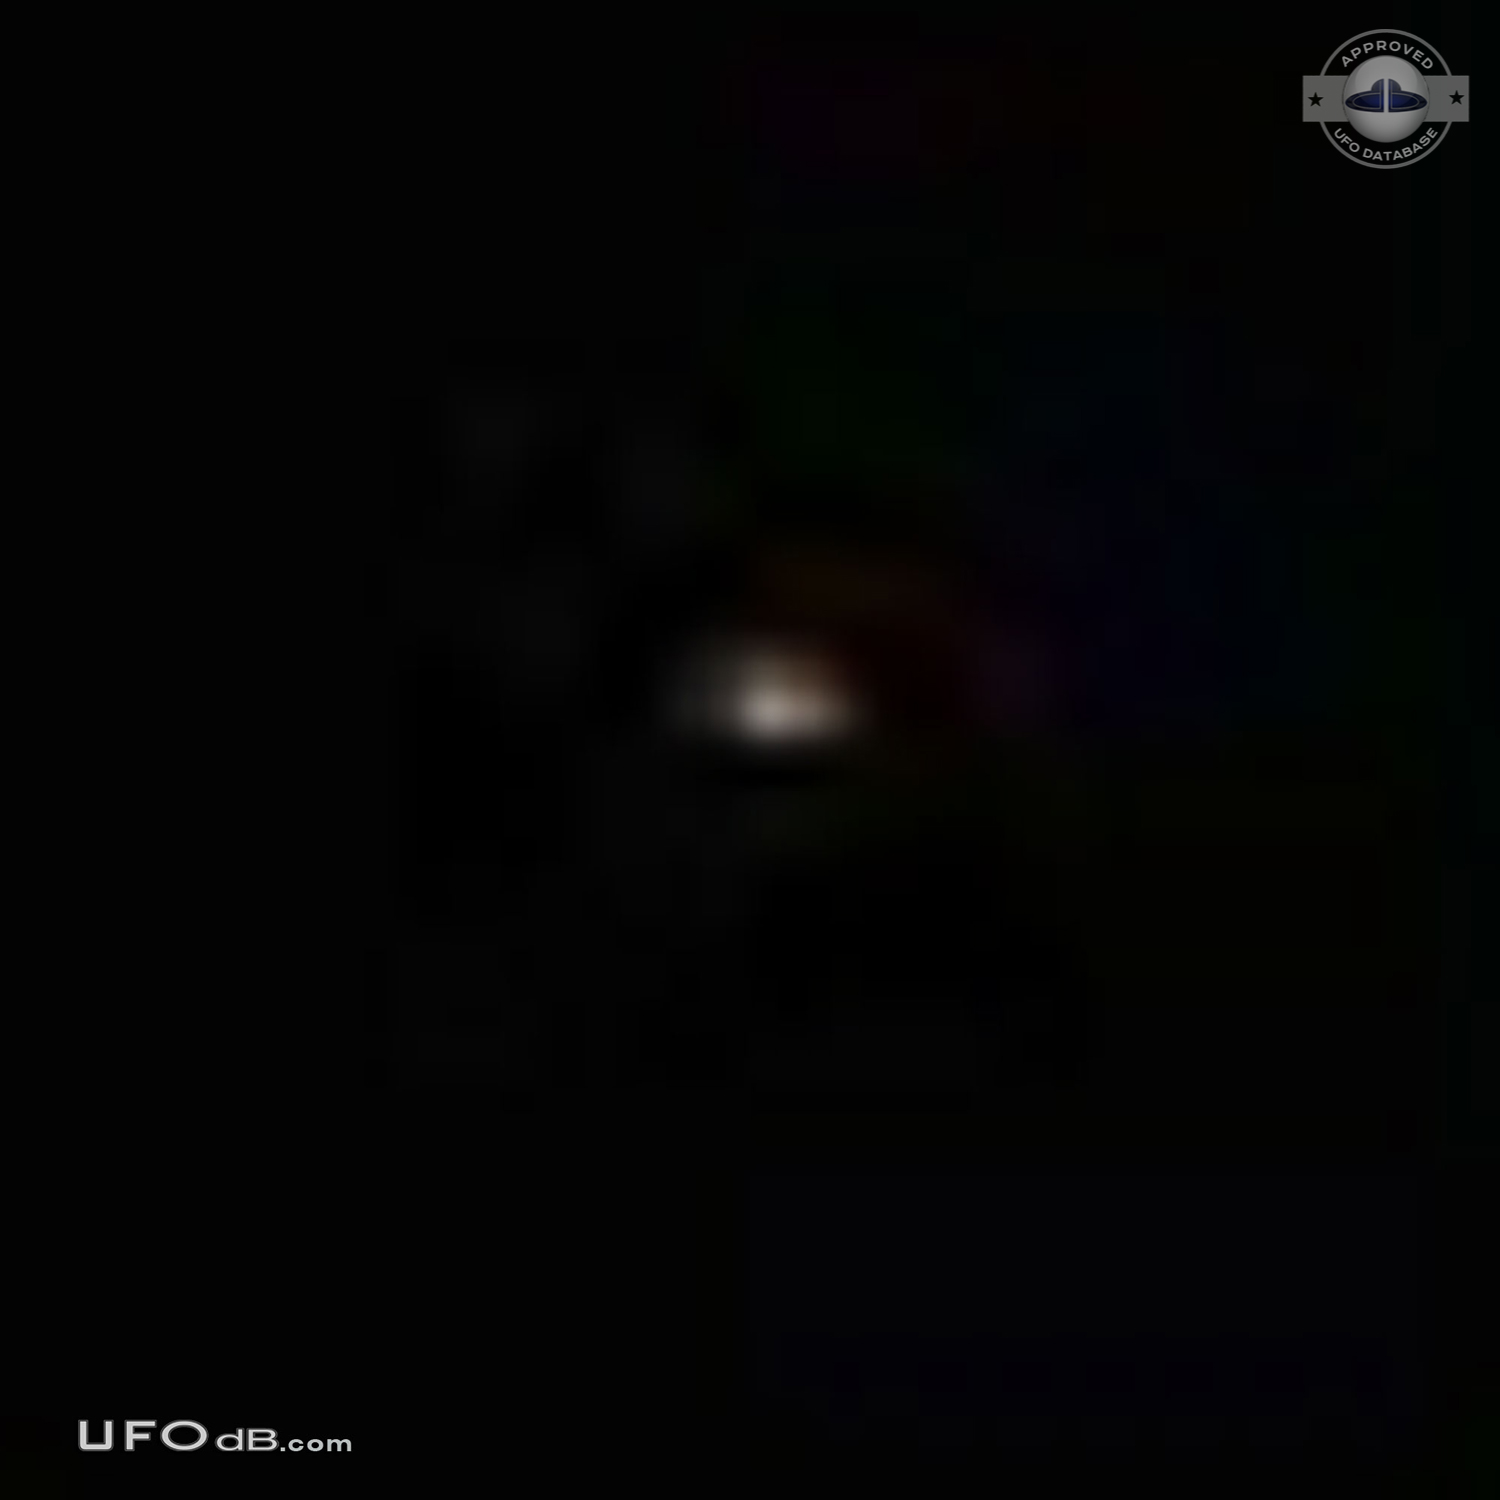 South African used to plane get UFO picture over Tamboo airport 2012 UFO Picture #419-1